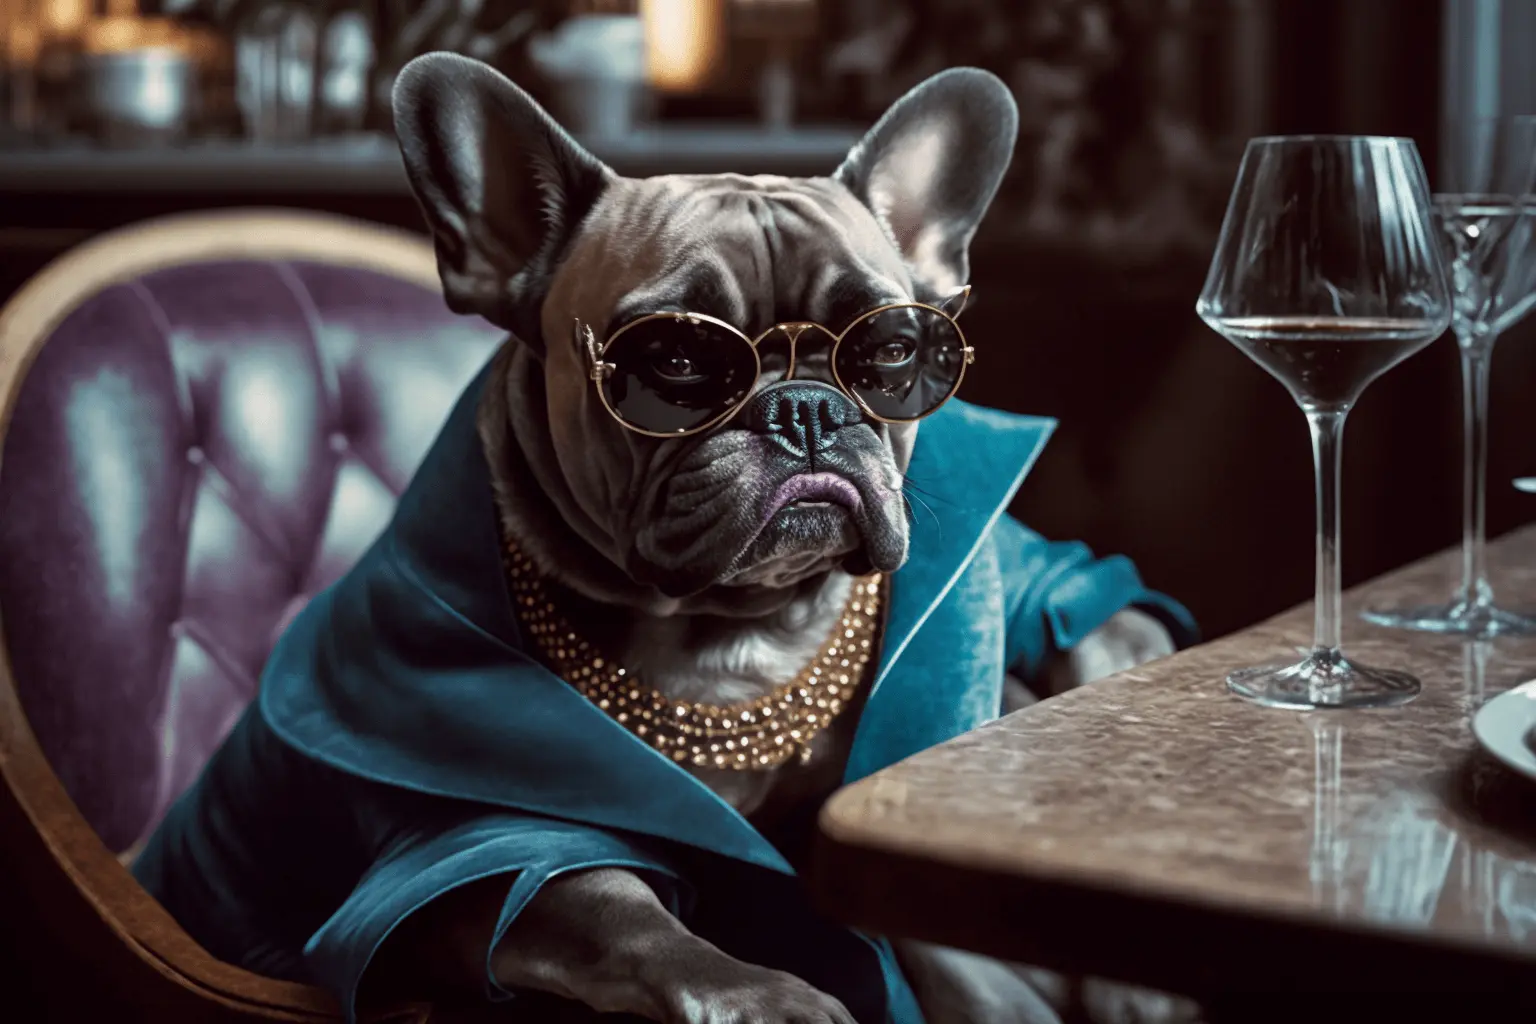 French Bulldog Wearing Velvet Blazer Jacket Gold Jewelry and Sunglasses Sitting in a Dark Academia Aesthetic Leather Chair in a Bar